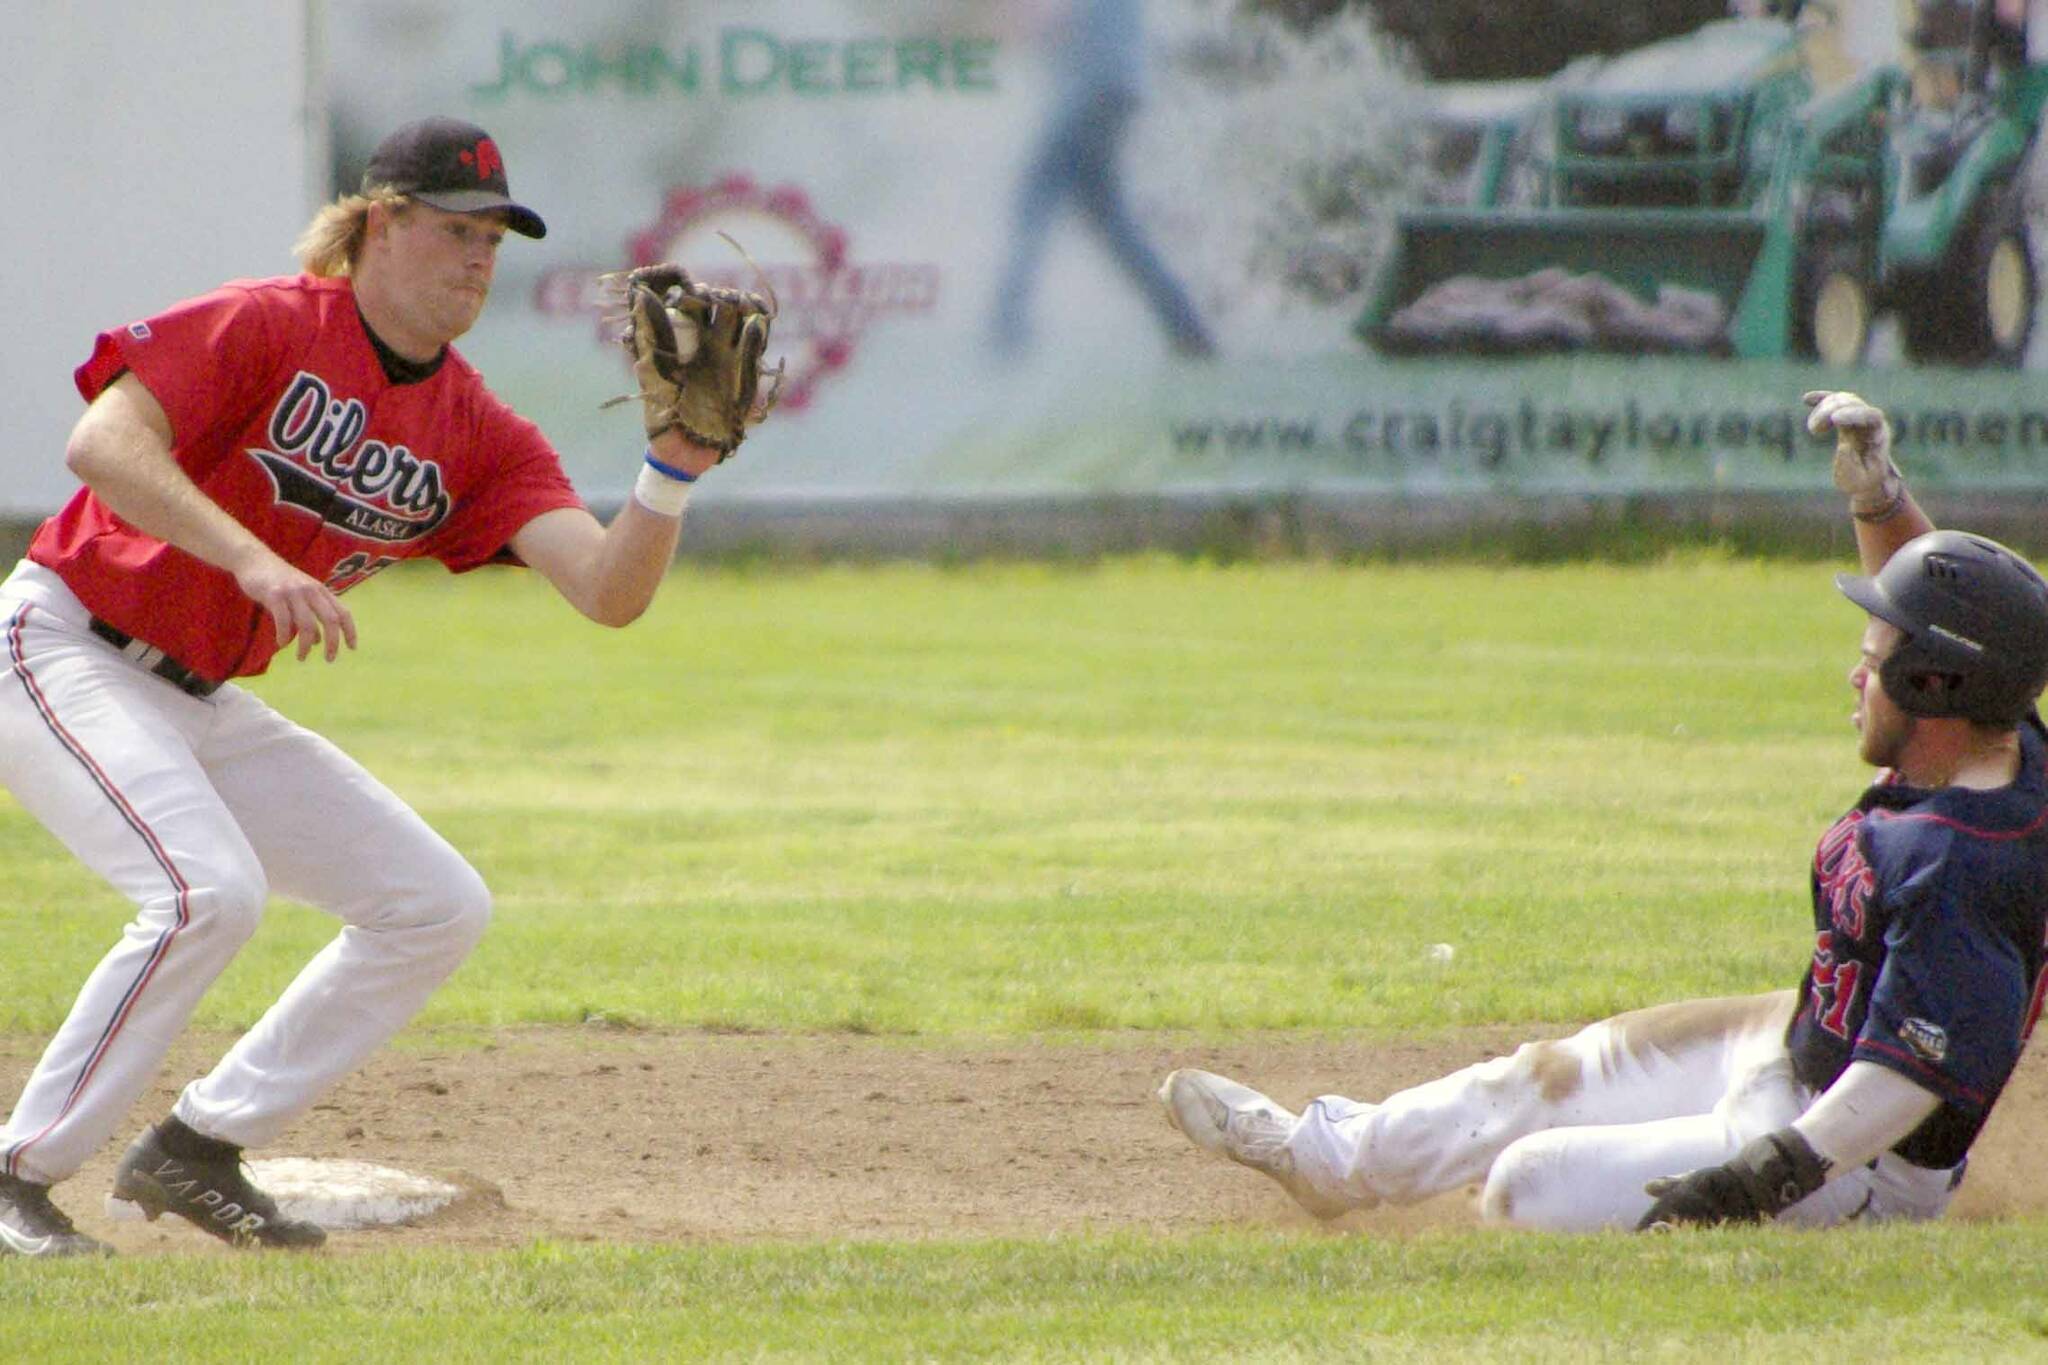 OIlers second baseman Graiden West gets ready to tag out Justin Grech of the Chugiak-Eagle River Chinooks on a steal attempt Sunday, July 10, 2022, at Coral Seymour Memorial Park in Kenai, Alaska. (Photo by Jeff Helminiak/Peninsula Clarion)